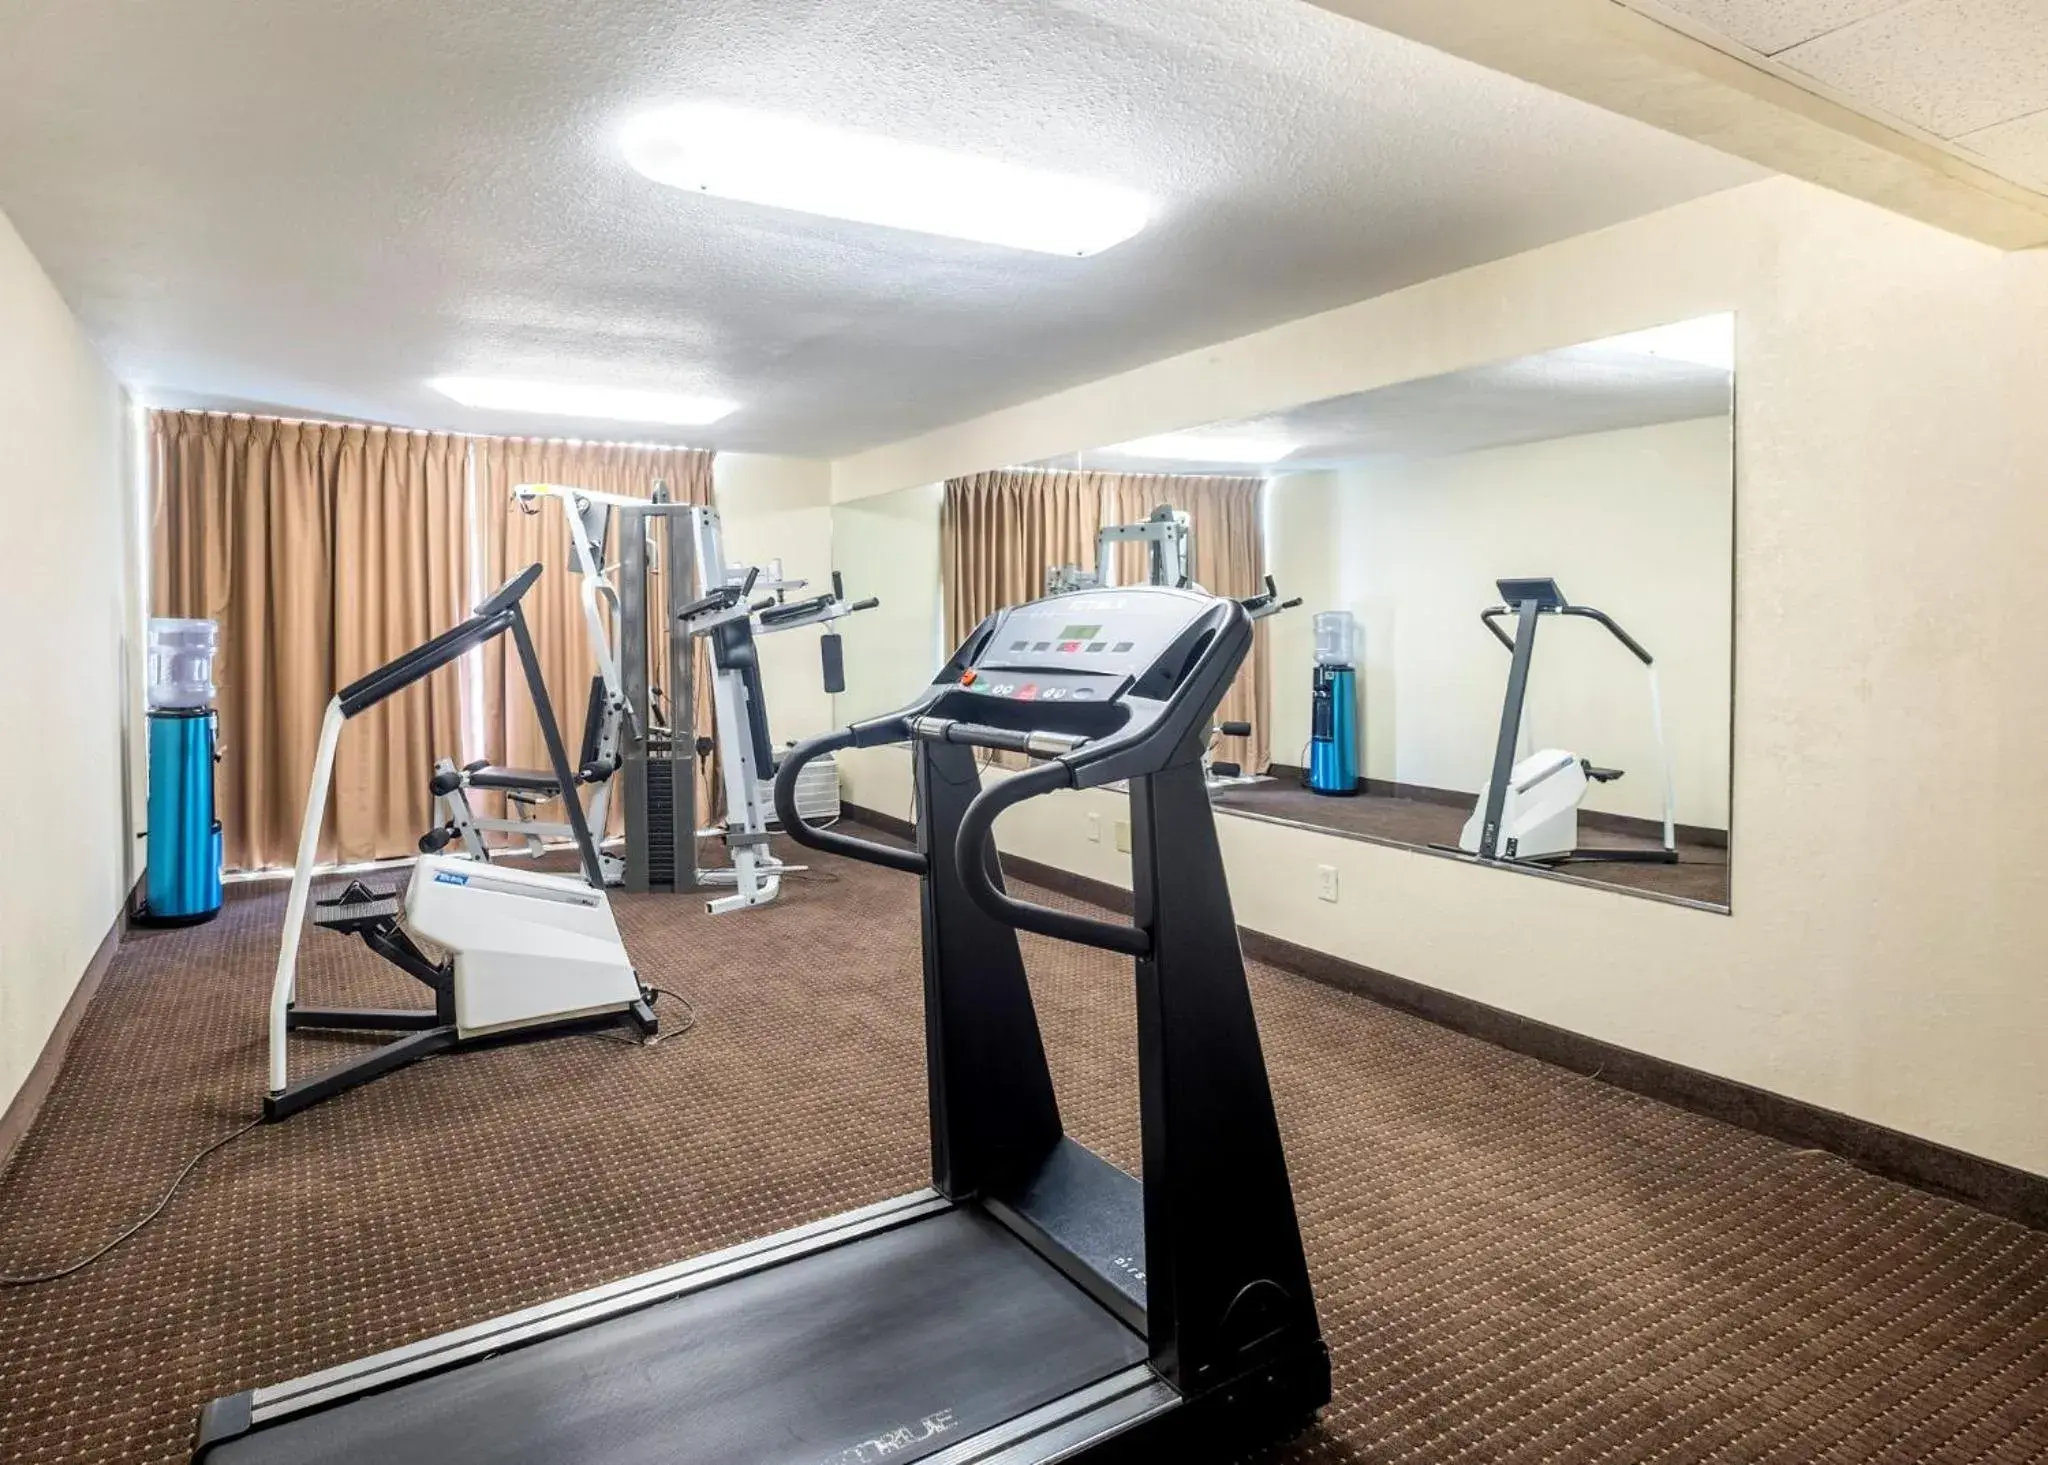 Fitness centre/facilities, Fitness Center/Facilities in Red Roof Inn Williamsport, PA